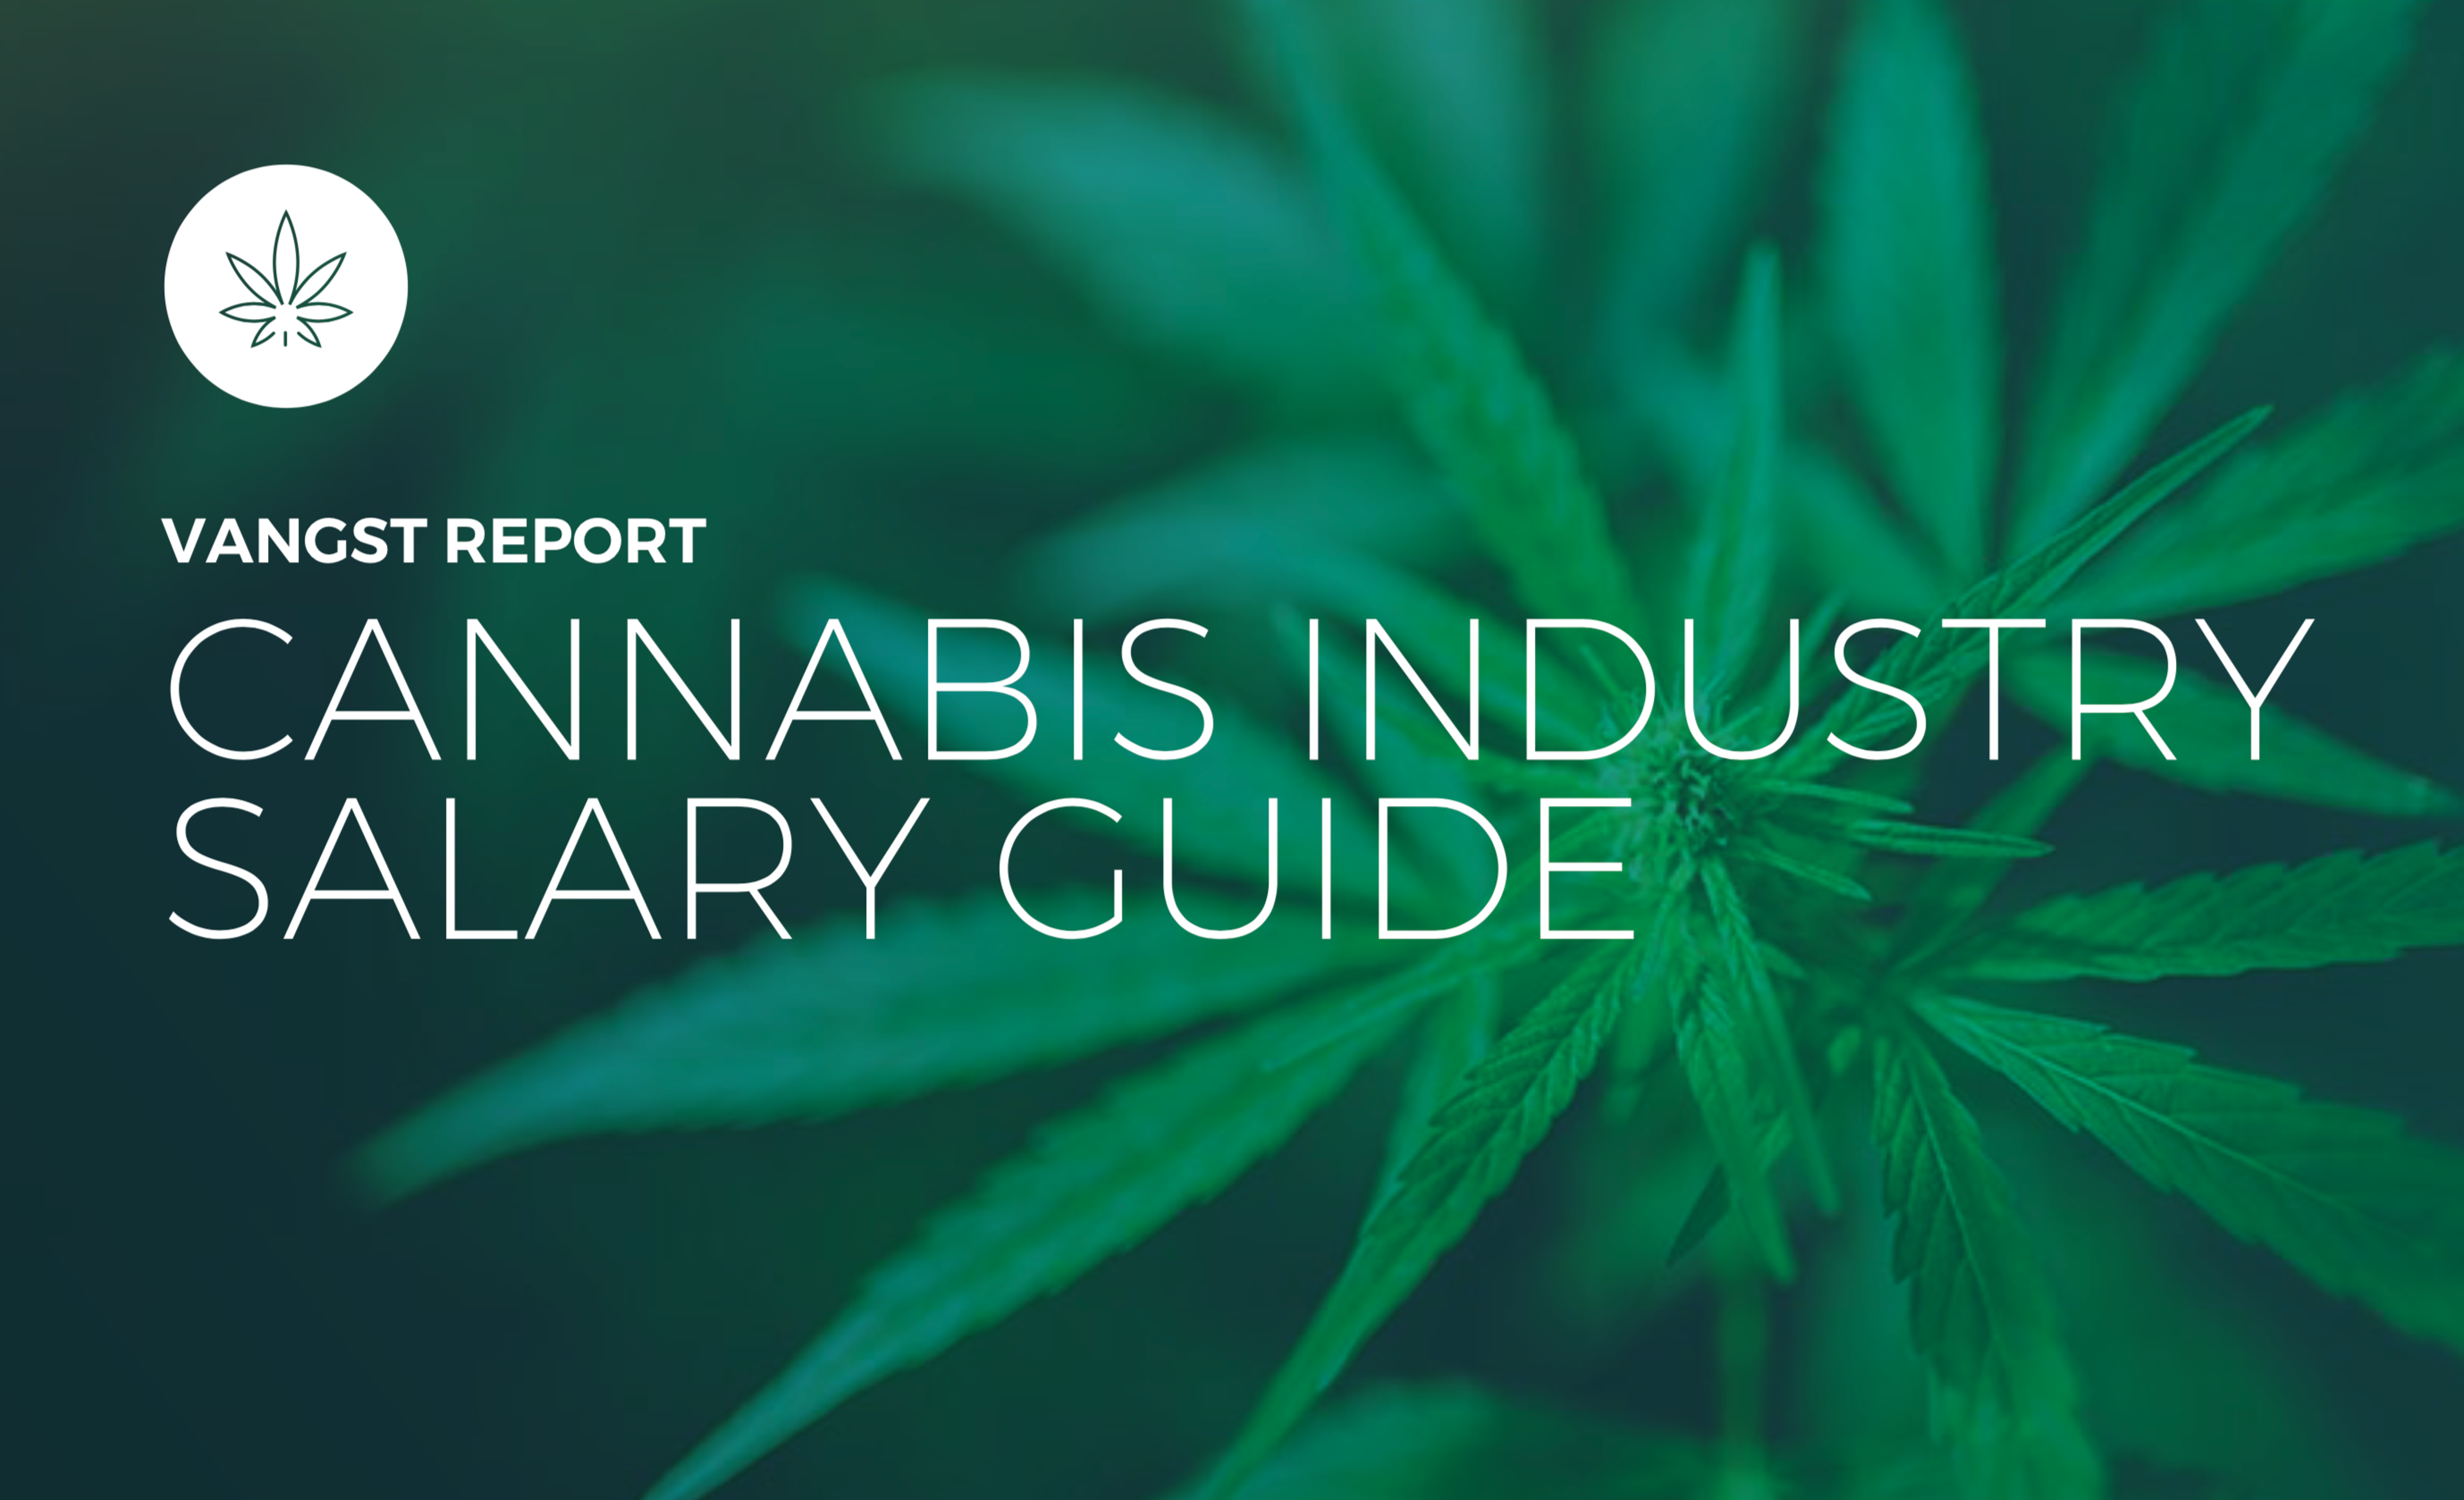 Cannabis Industry Supports 400K+ Jobs In US: How Much Do They Pay?